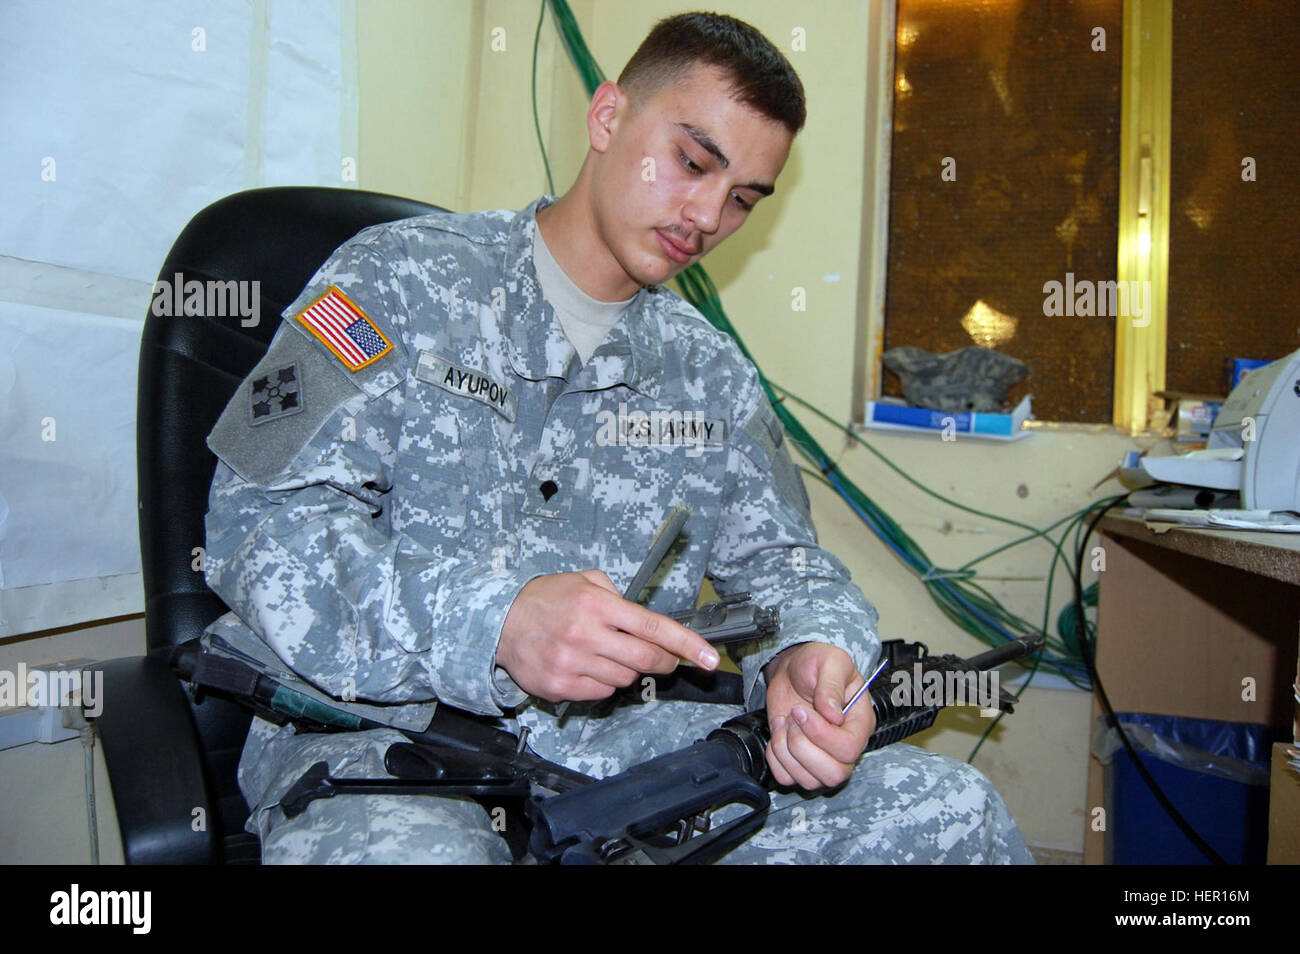 CAMP TAJI, Iraq – Spc. Eynar Ayupov, personnel clerk, Headquarters Support Company, 404th Aviation Support Battalion, Combat Aviation Brigade, 4th Infantry Division, Multi-National Division – Baghdad from Ufa, Russia, cleans his M16A2 rifle while sitting at his desk on Camp Taji Oct. 14. Ayupov was born and raised in Russia and has been in the U.S. Army since November 2006. He is scheduled to become a U.S. citizen while deployed to Iraq.  (U.S. Army photo by Sgt. 1st Class Brent Hunt, CAB PAO, 4th Inf. Div., MND-B) Why I Serve, Russian-born CAB Soldier scheduled for citizenship, enjoys U.S. Ar Stock Photo